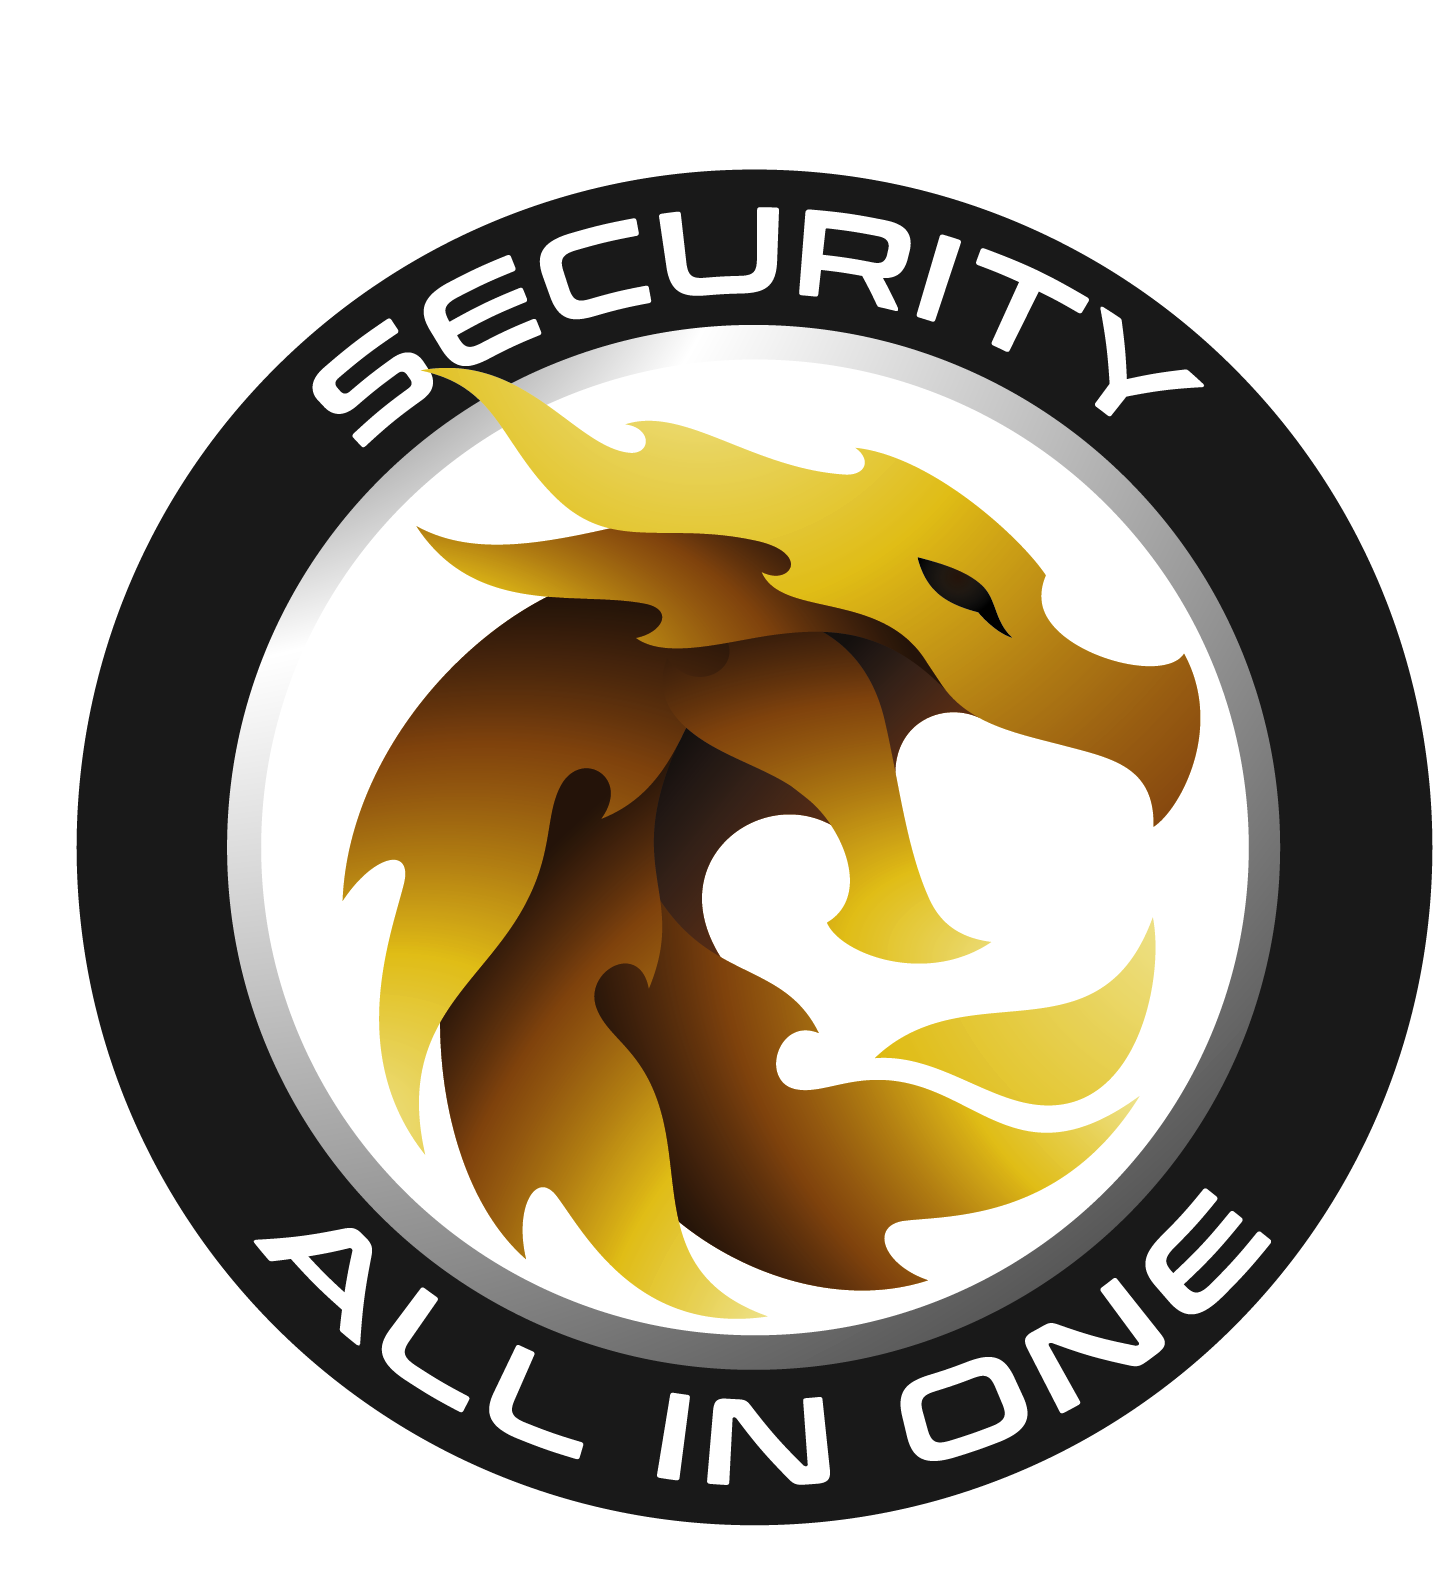 Security all in one